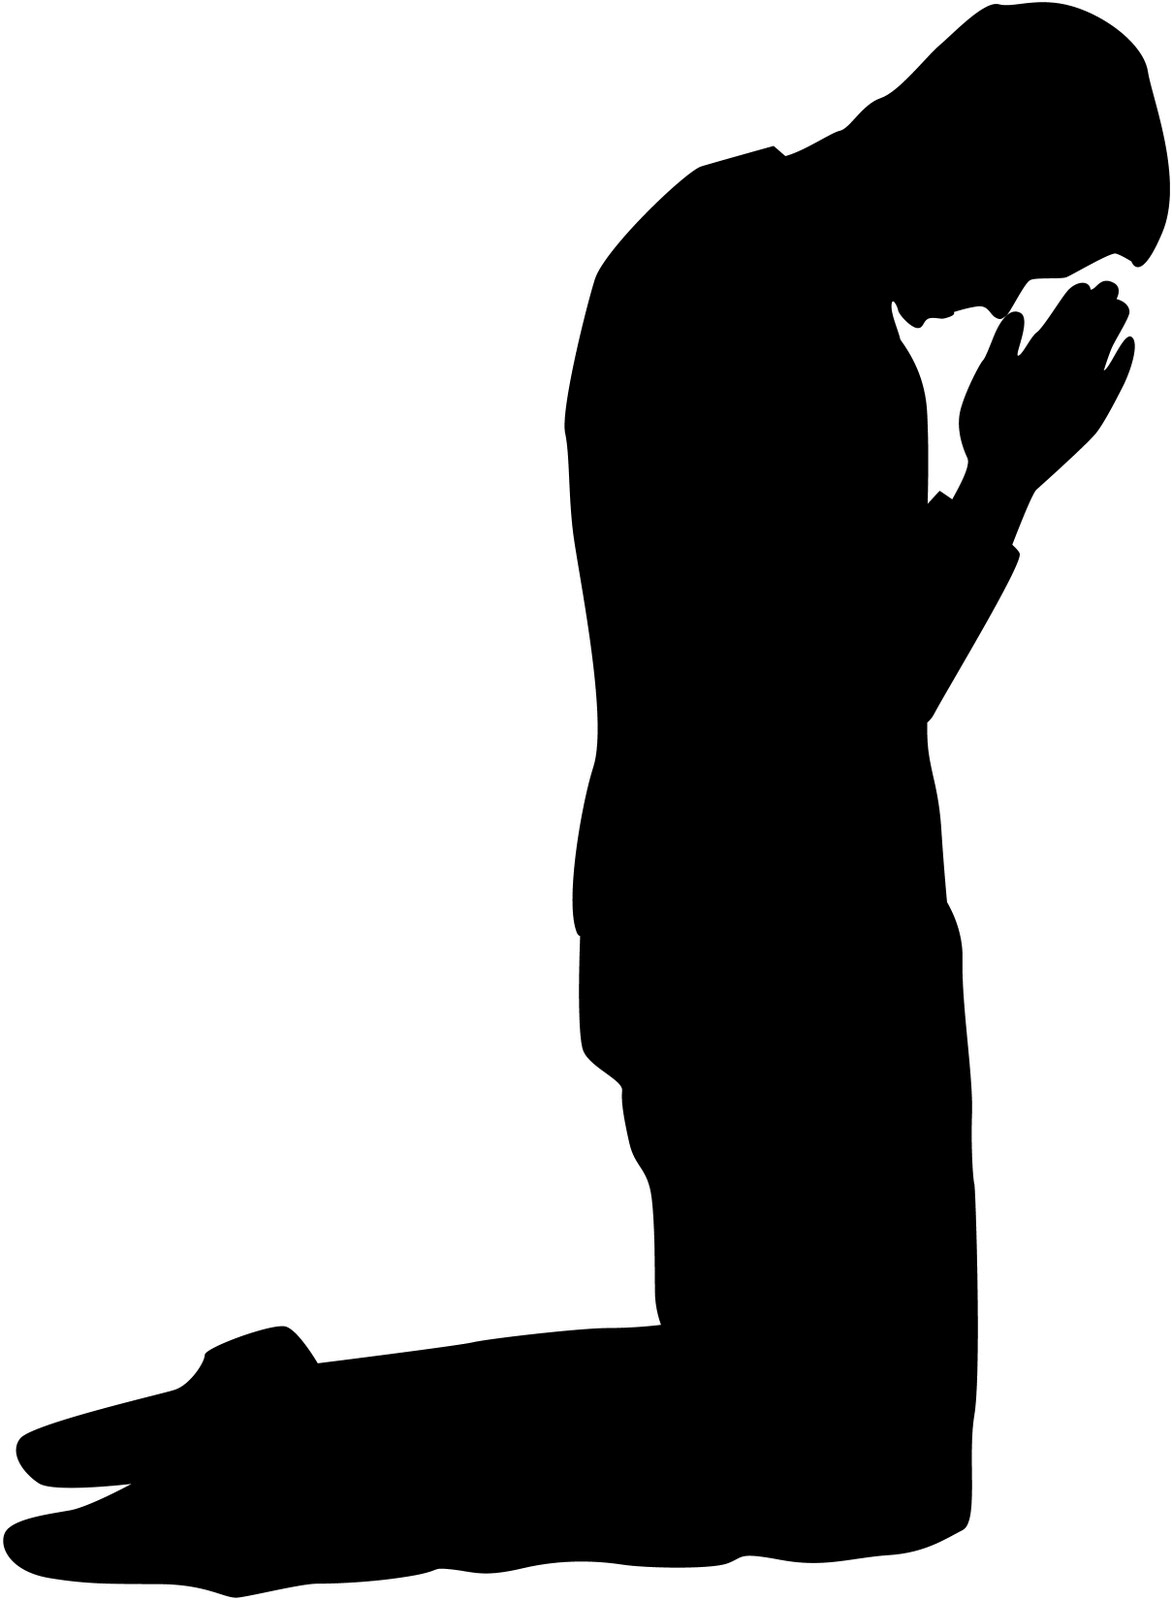 Kneeling prince silhouette clipart